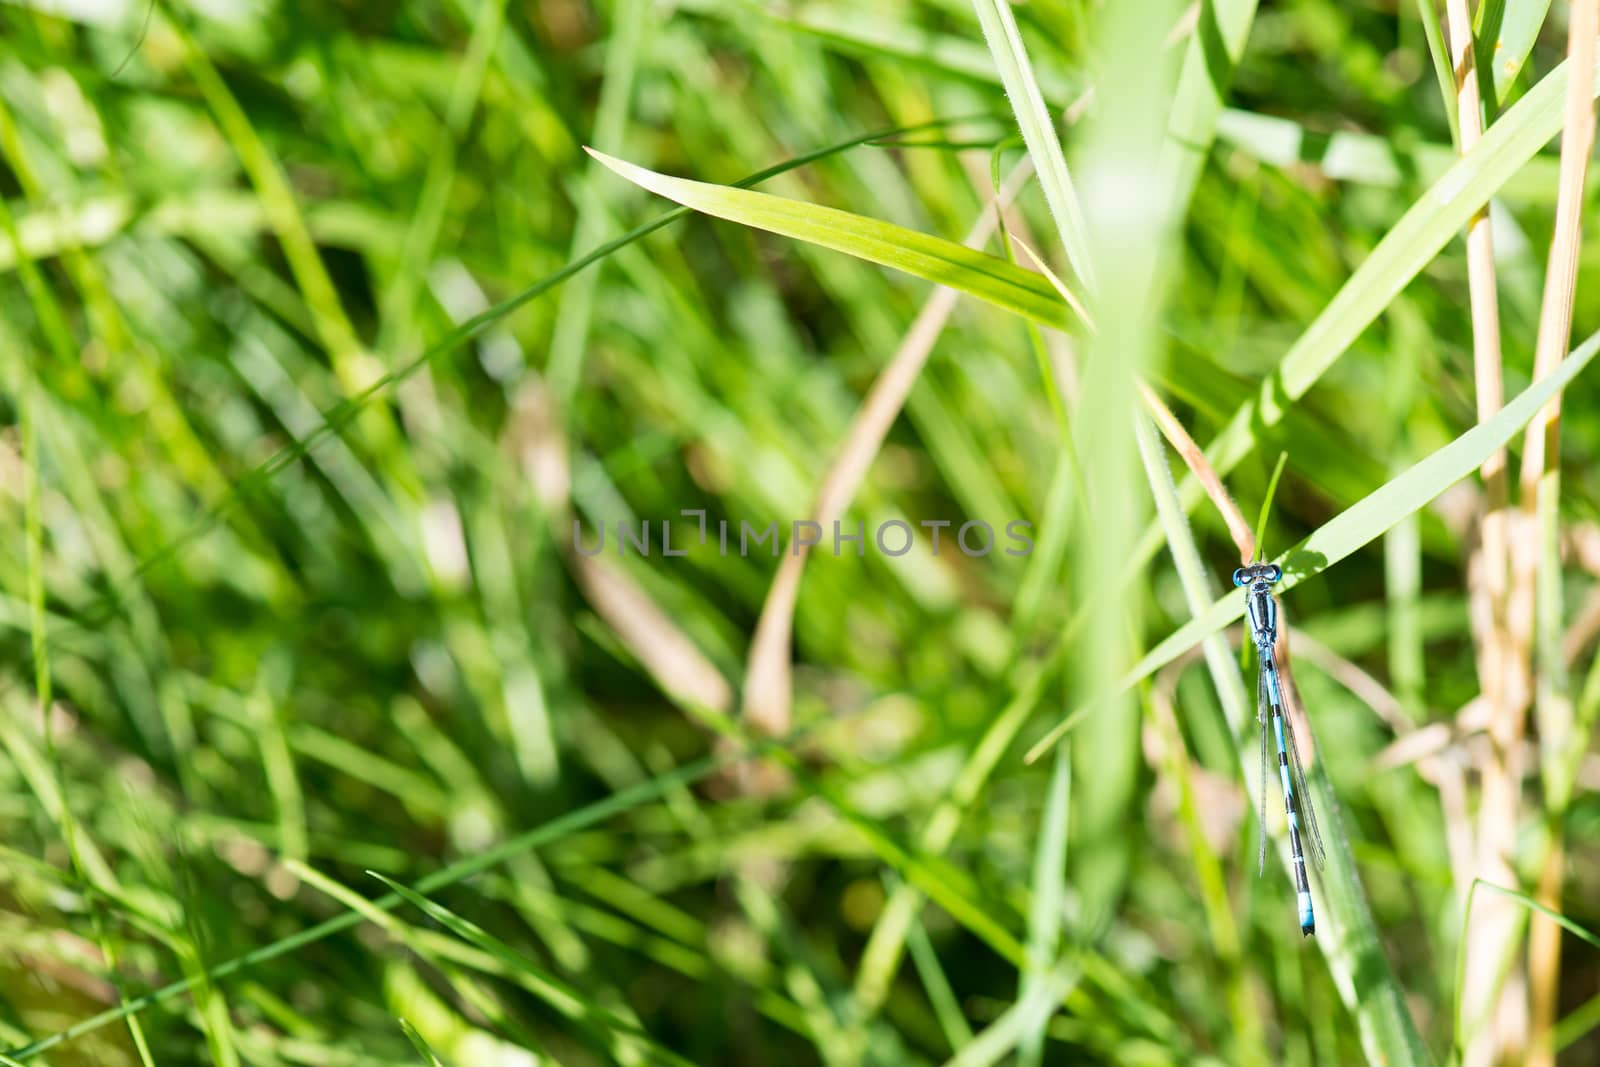 Coenagrion Dragonfly sitting on a leaf of green grass